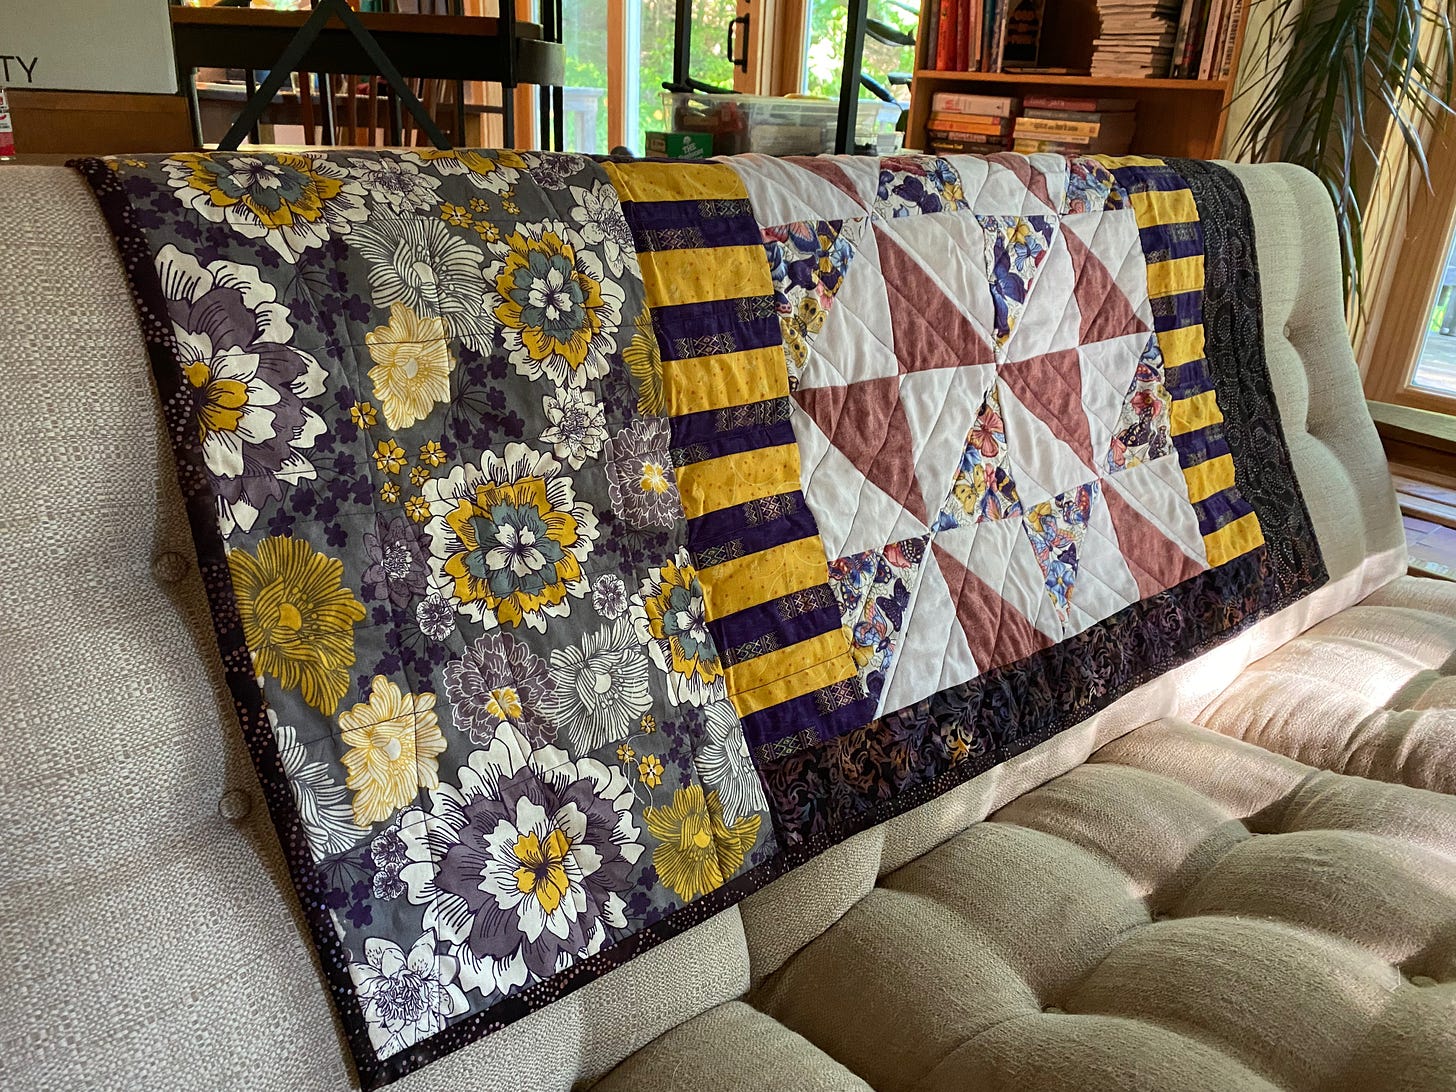 A small rectangular quilt rests on the back of a white sofa. It has contrasting panels of fabrics in shades of purple, blue, white, pink and yellow. There are large flowers, purple and yellow stripes, white and pink triangles, and colorful fabric patterned with butterflies.